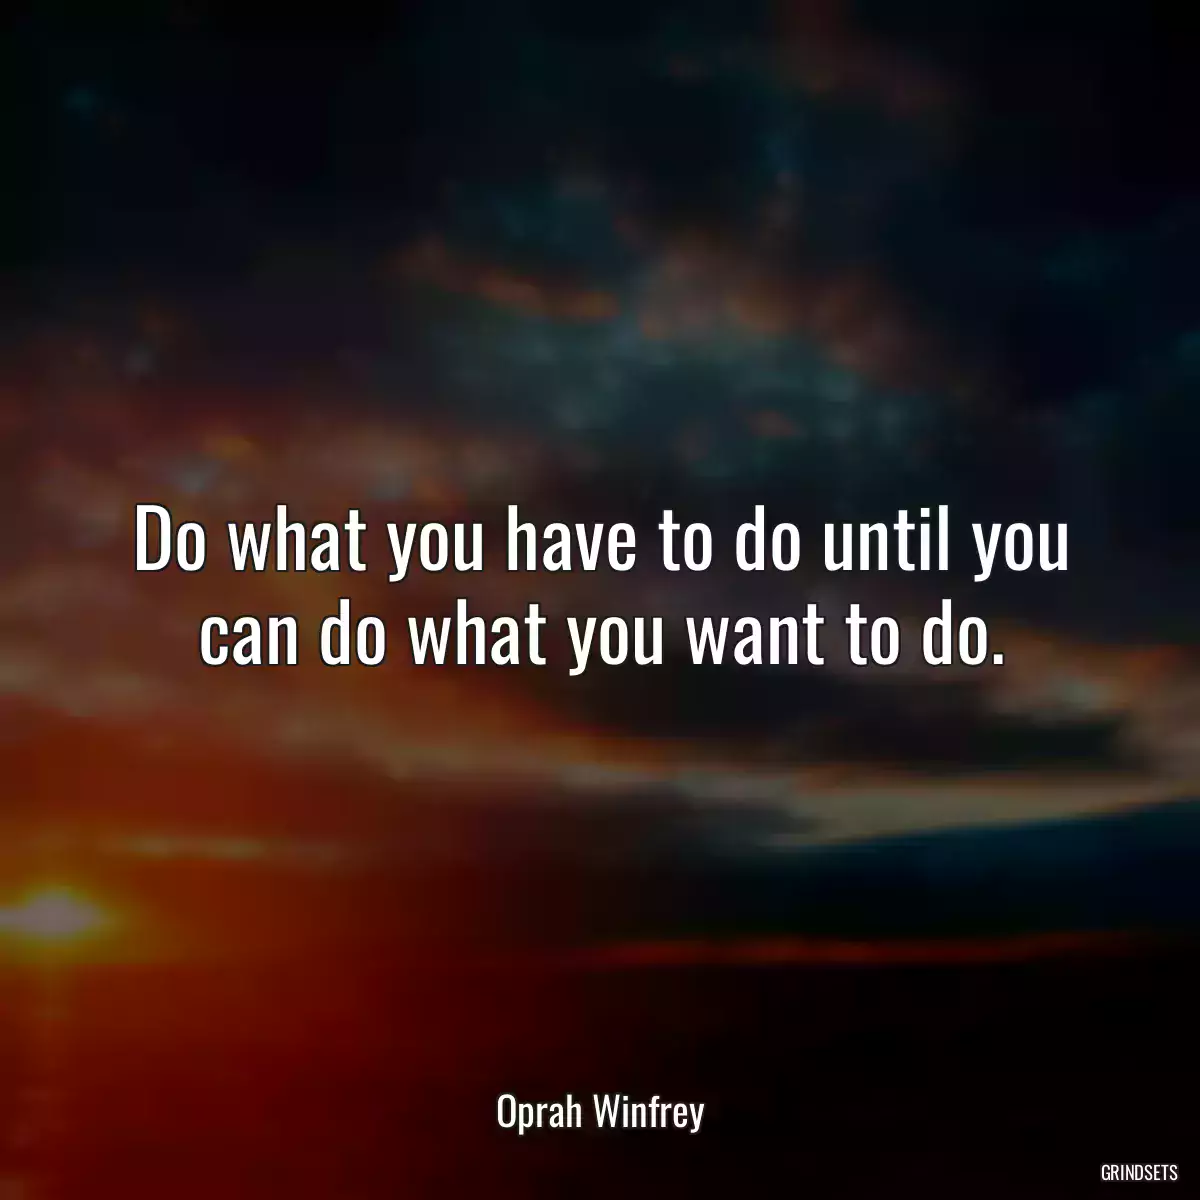 Do what you have to do until you can do what you want to do.